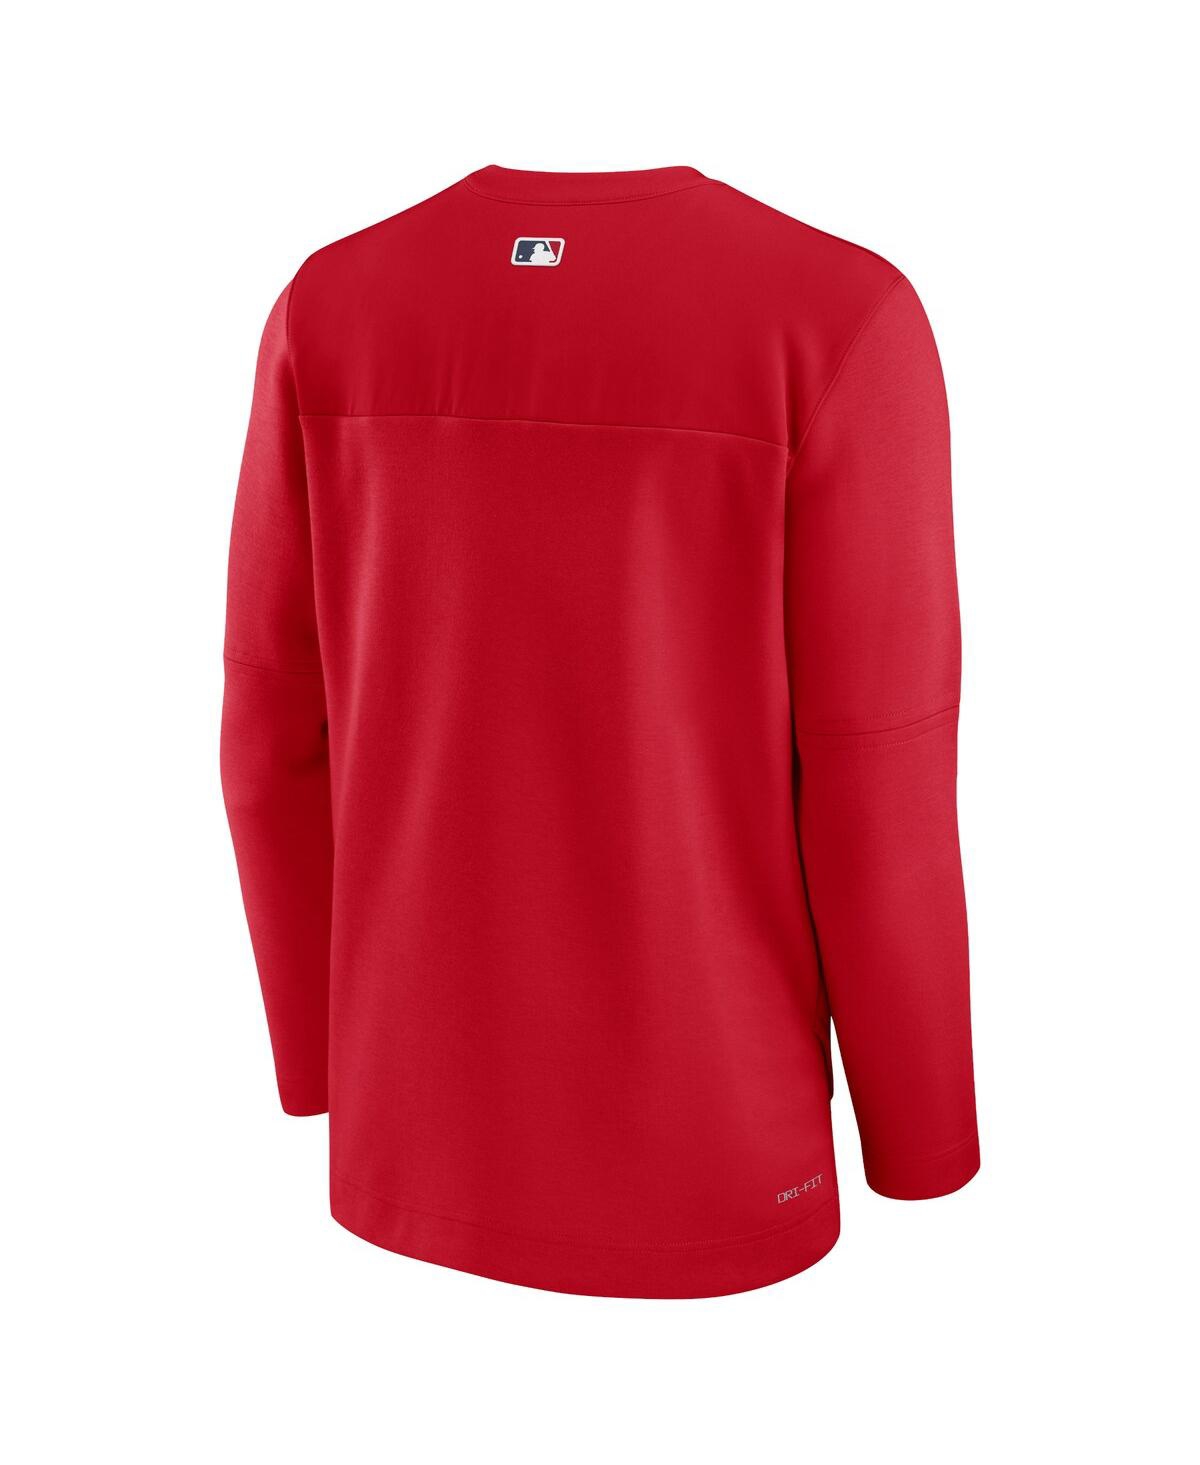 Shop Nike Men's  Red St. Louis Cardinals Authentic Collection Game Time Performance Half-zip Top